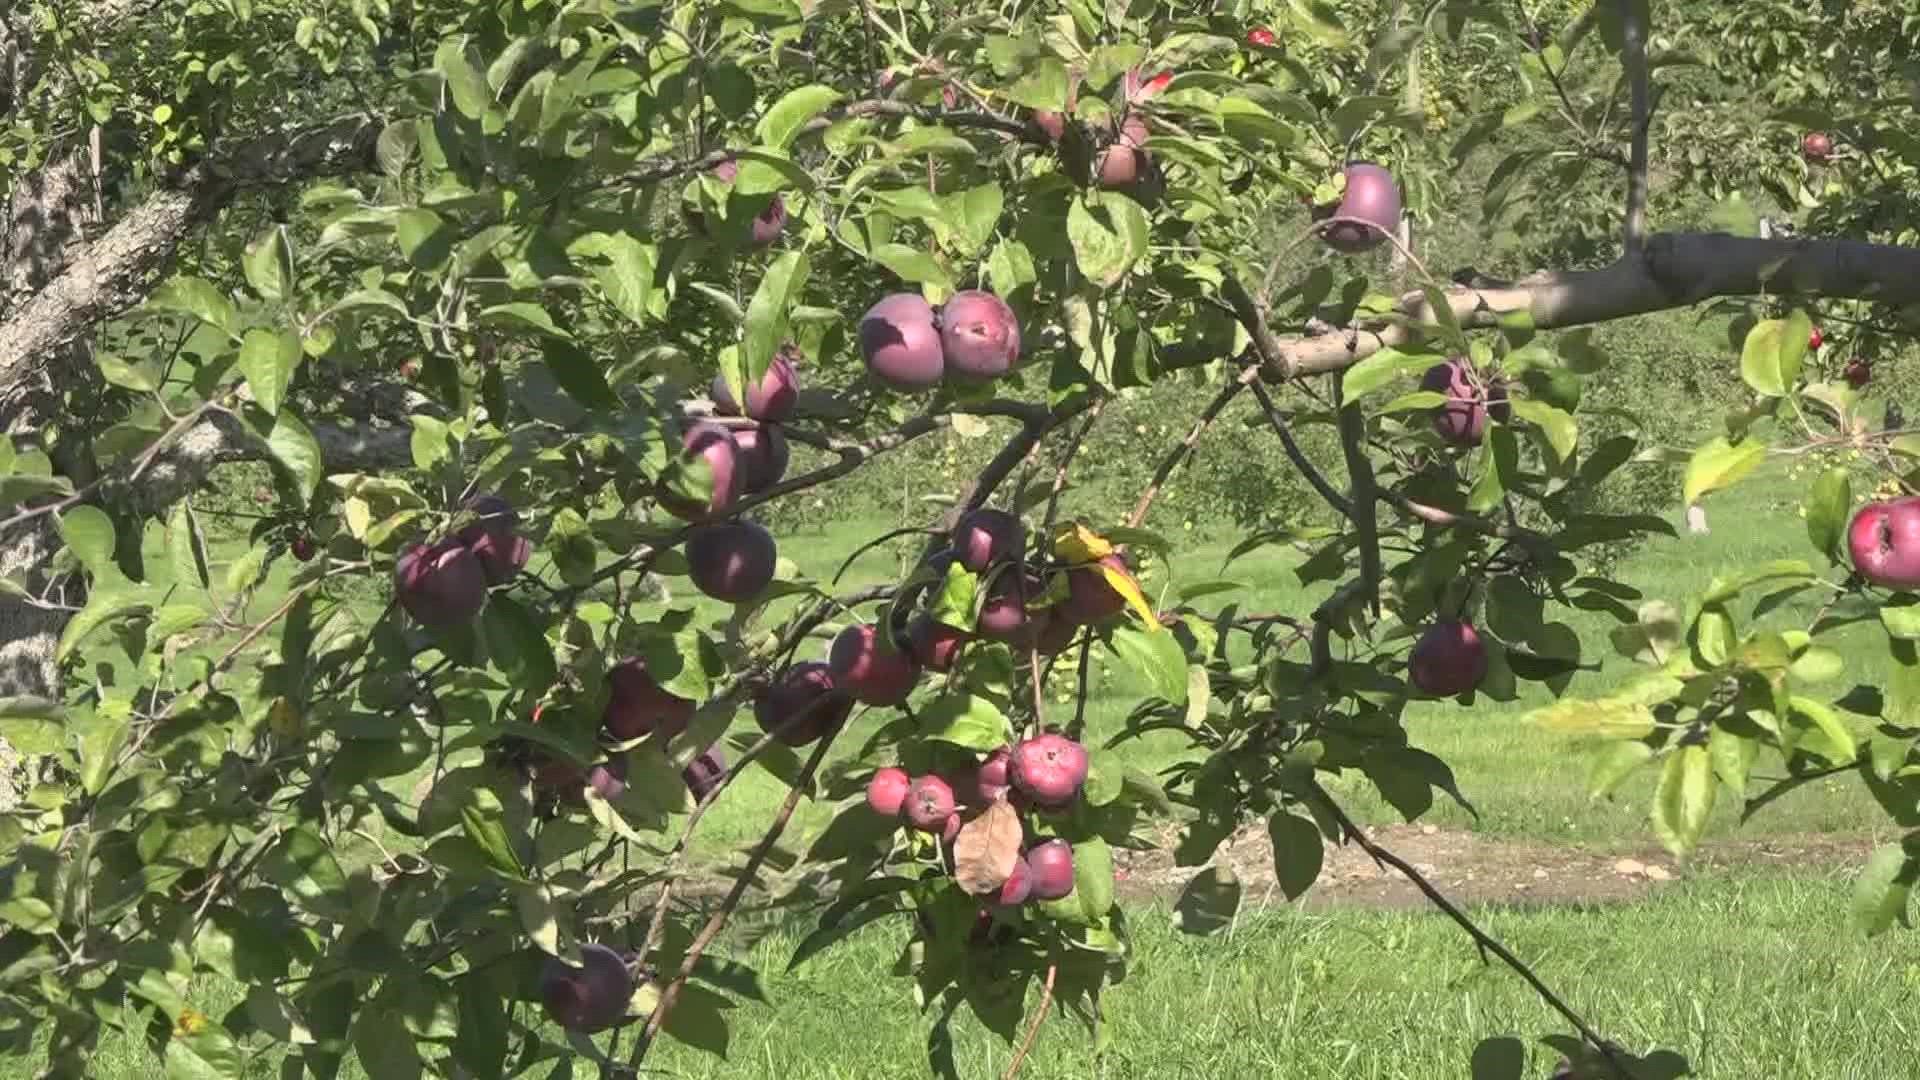 The Barker-Lavorgna family knew nothing about running an apple orchard but got to work to open Honey Hill Orchard in Lewiston for the season